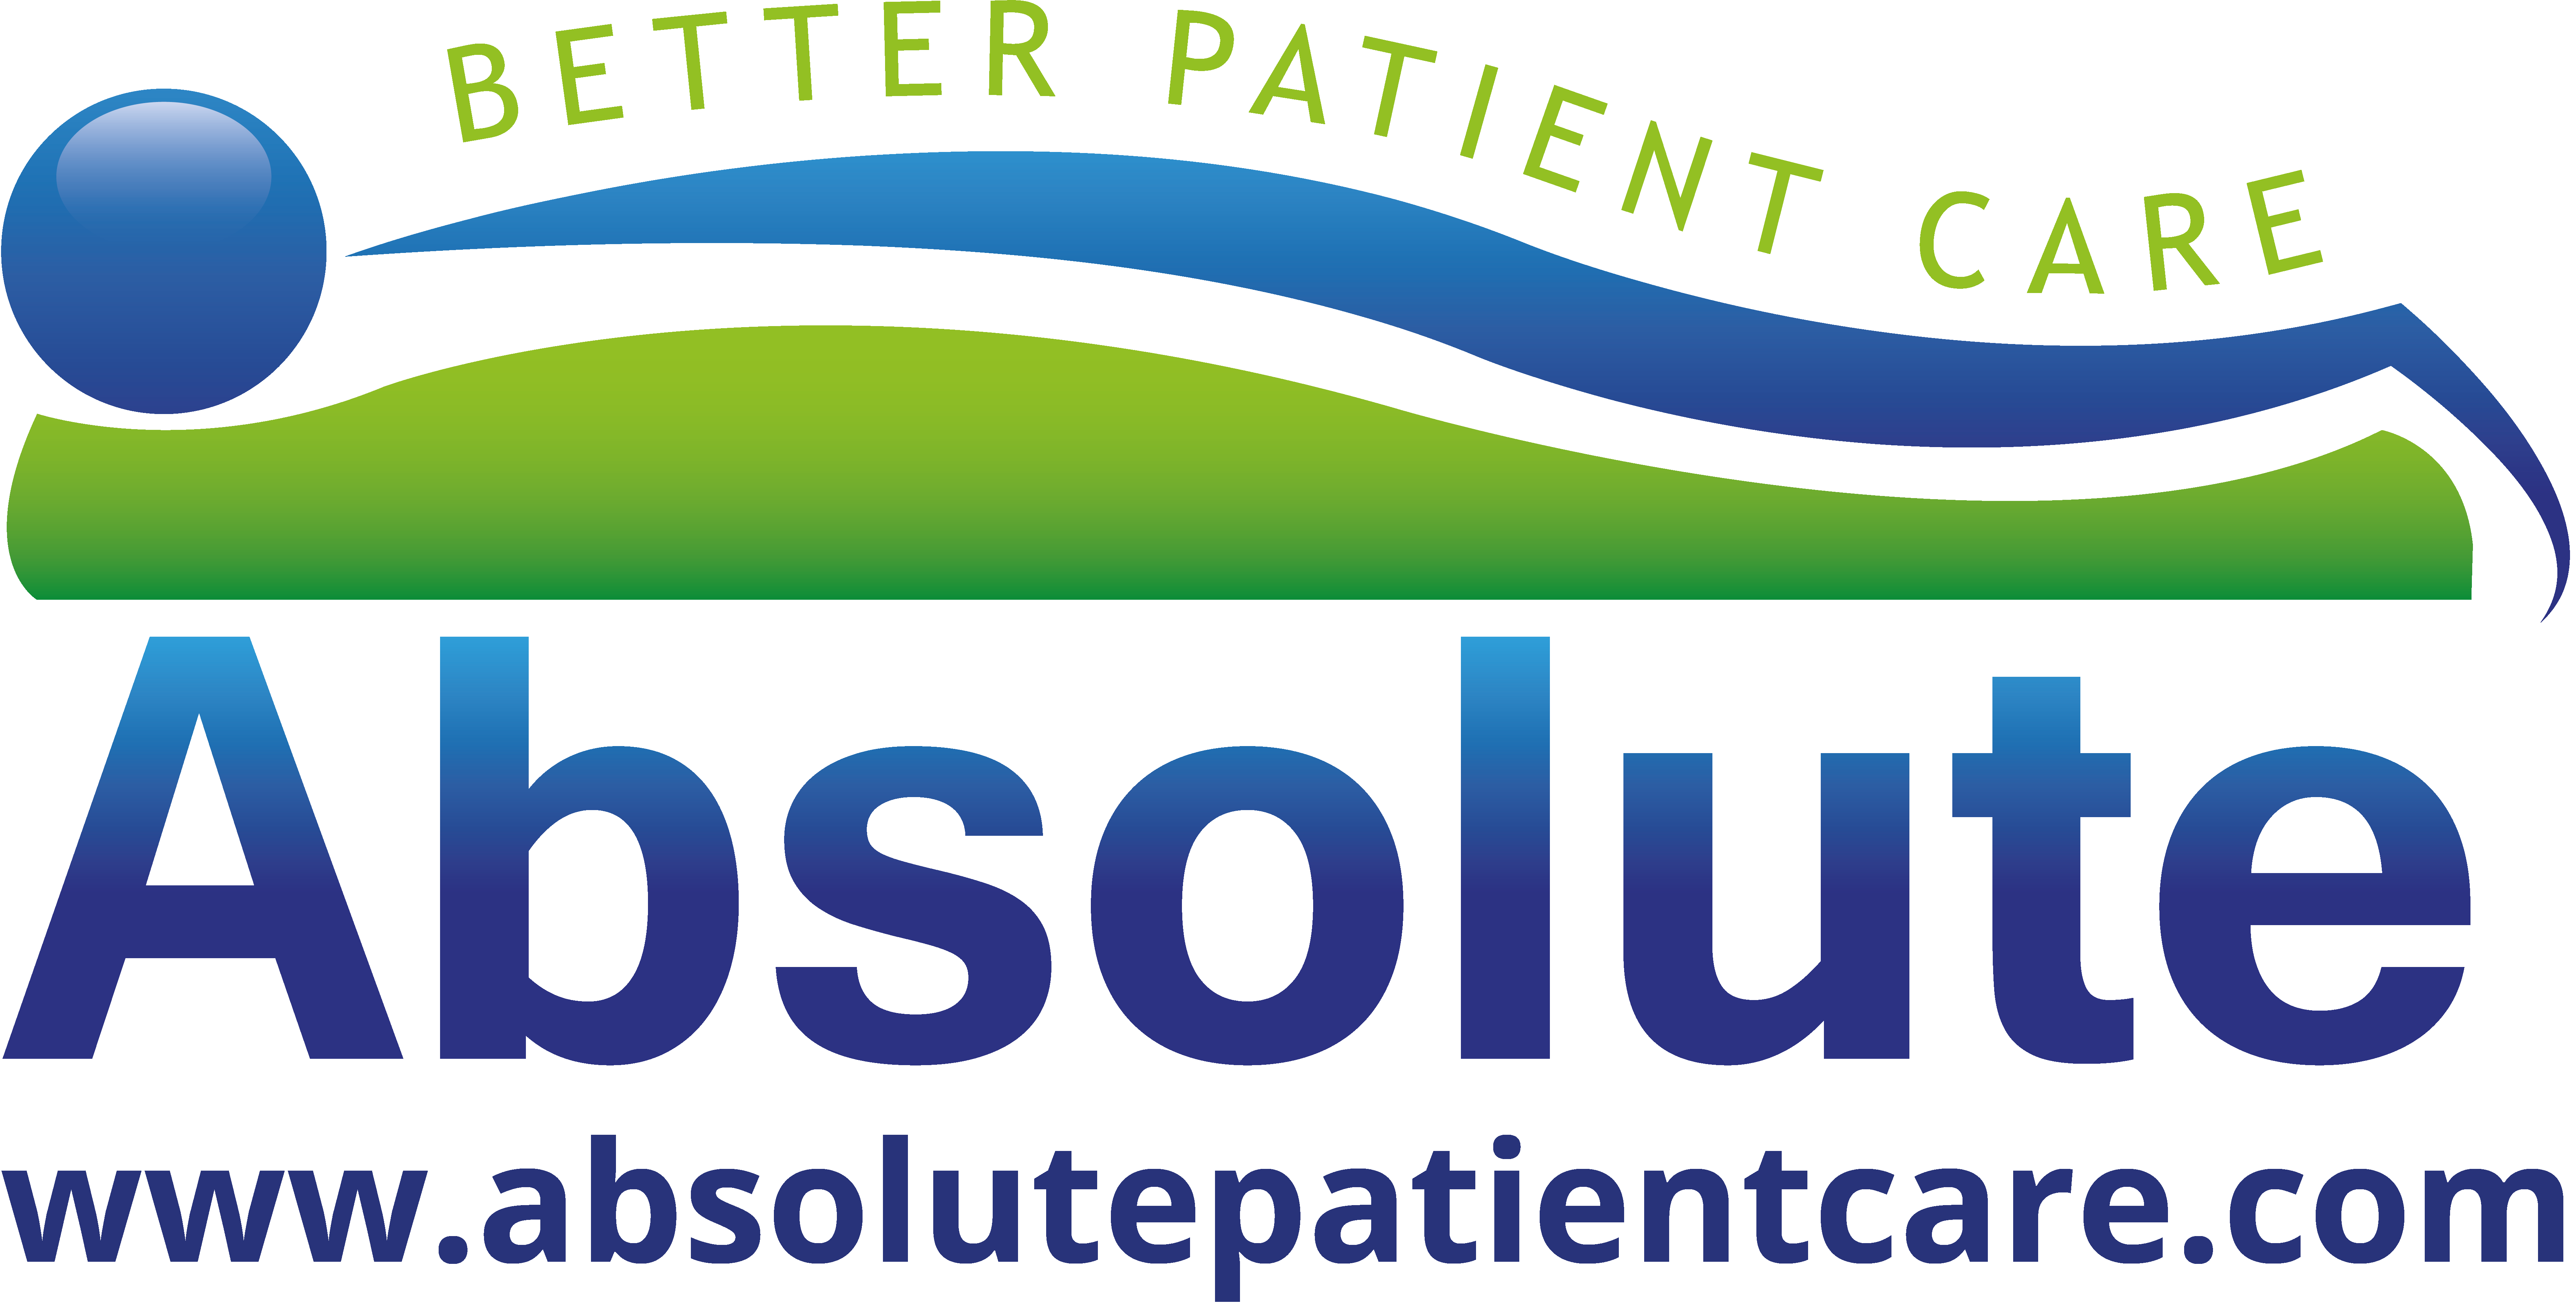 Absolute Patient Care